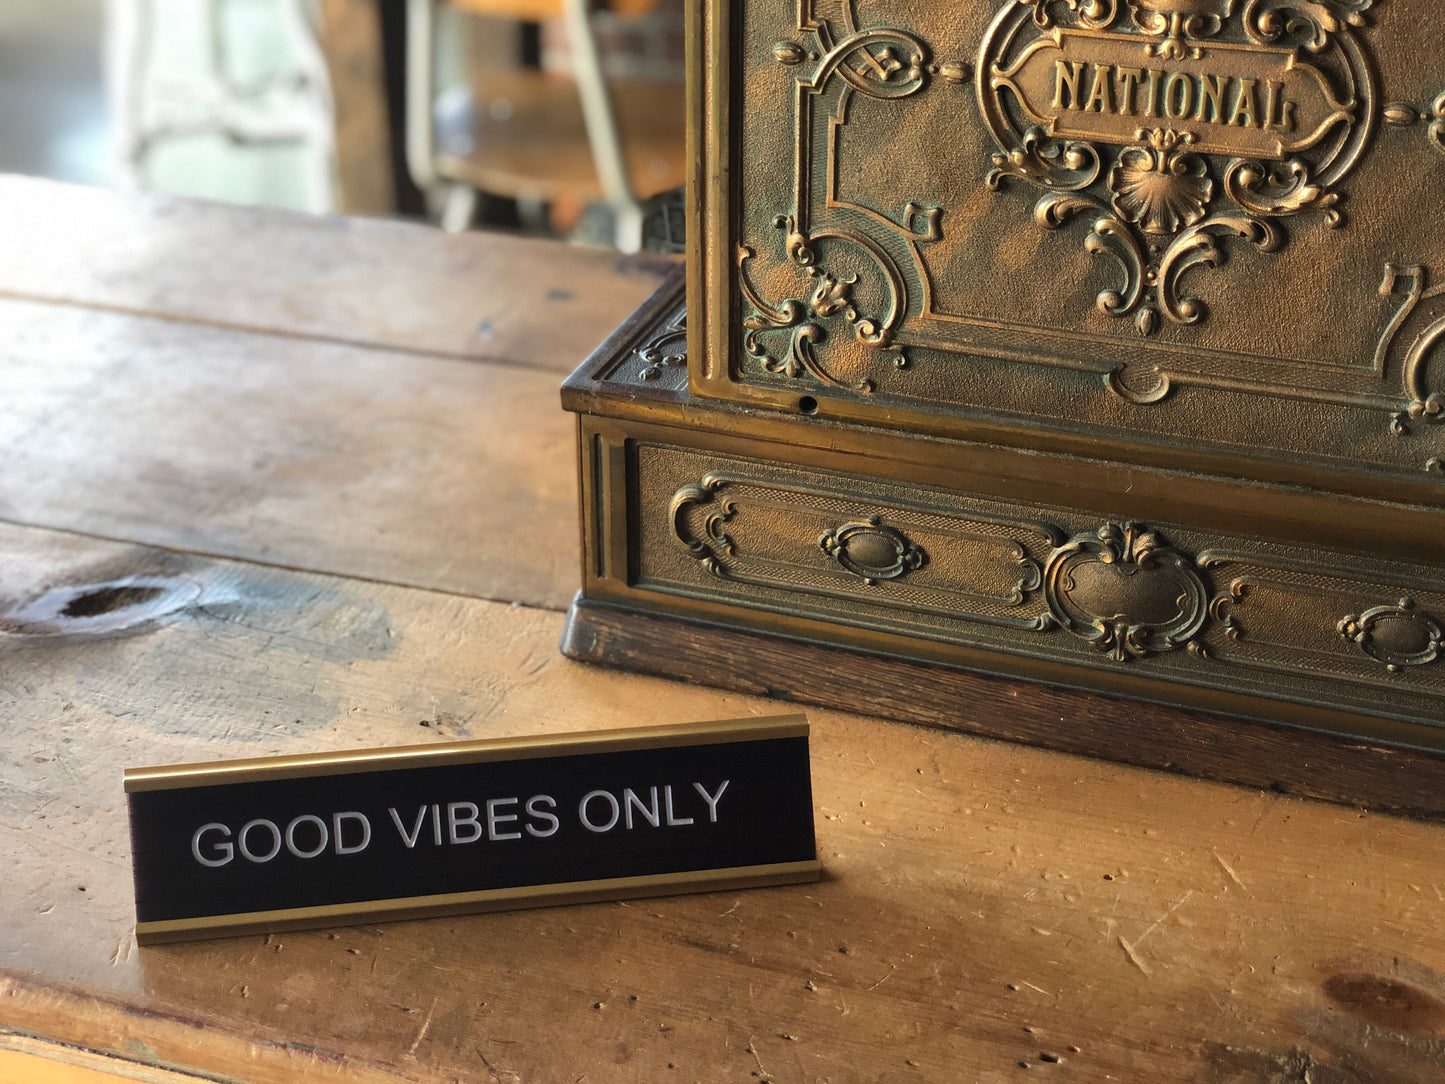 GOOD VIBES ONLY  - Funny Desk Name Plate